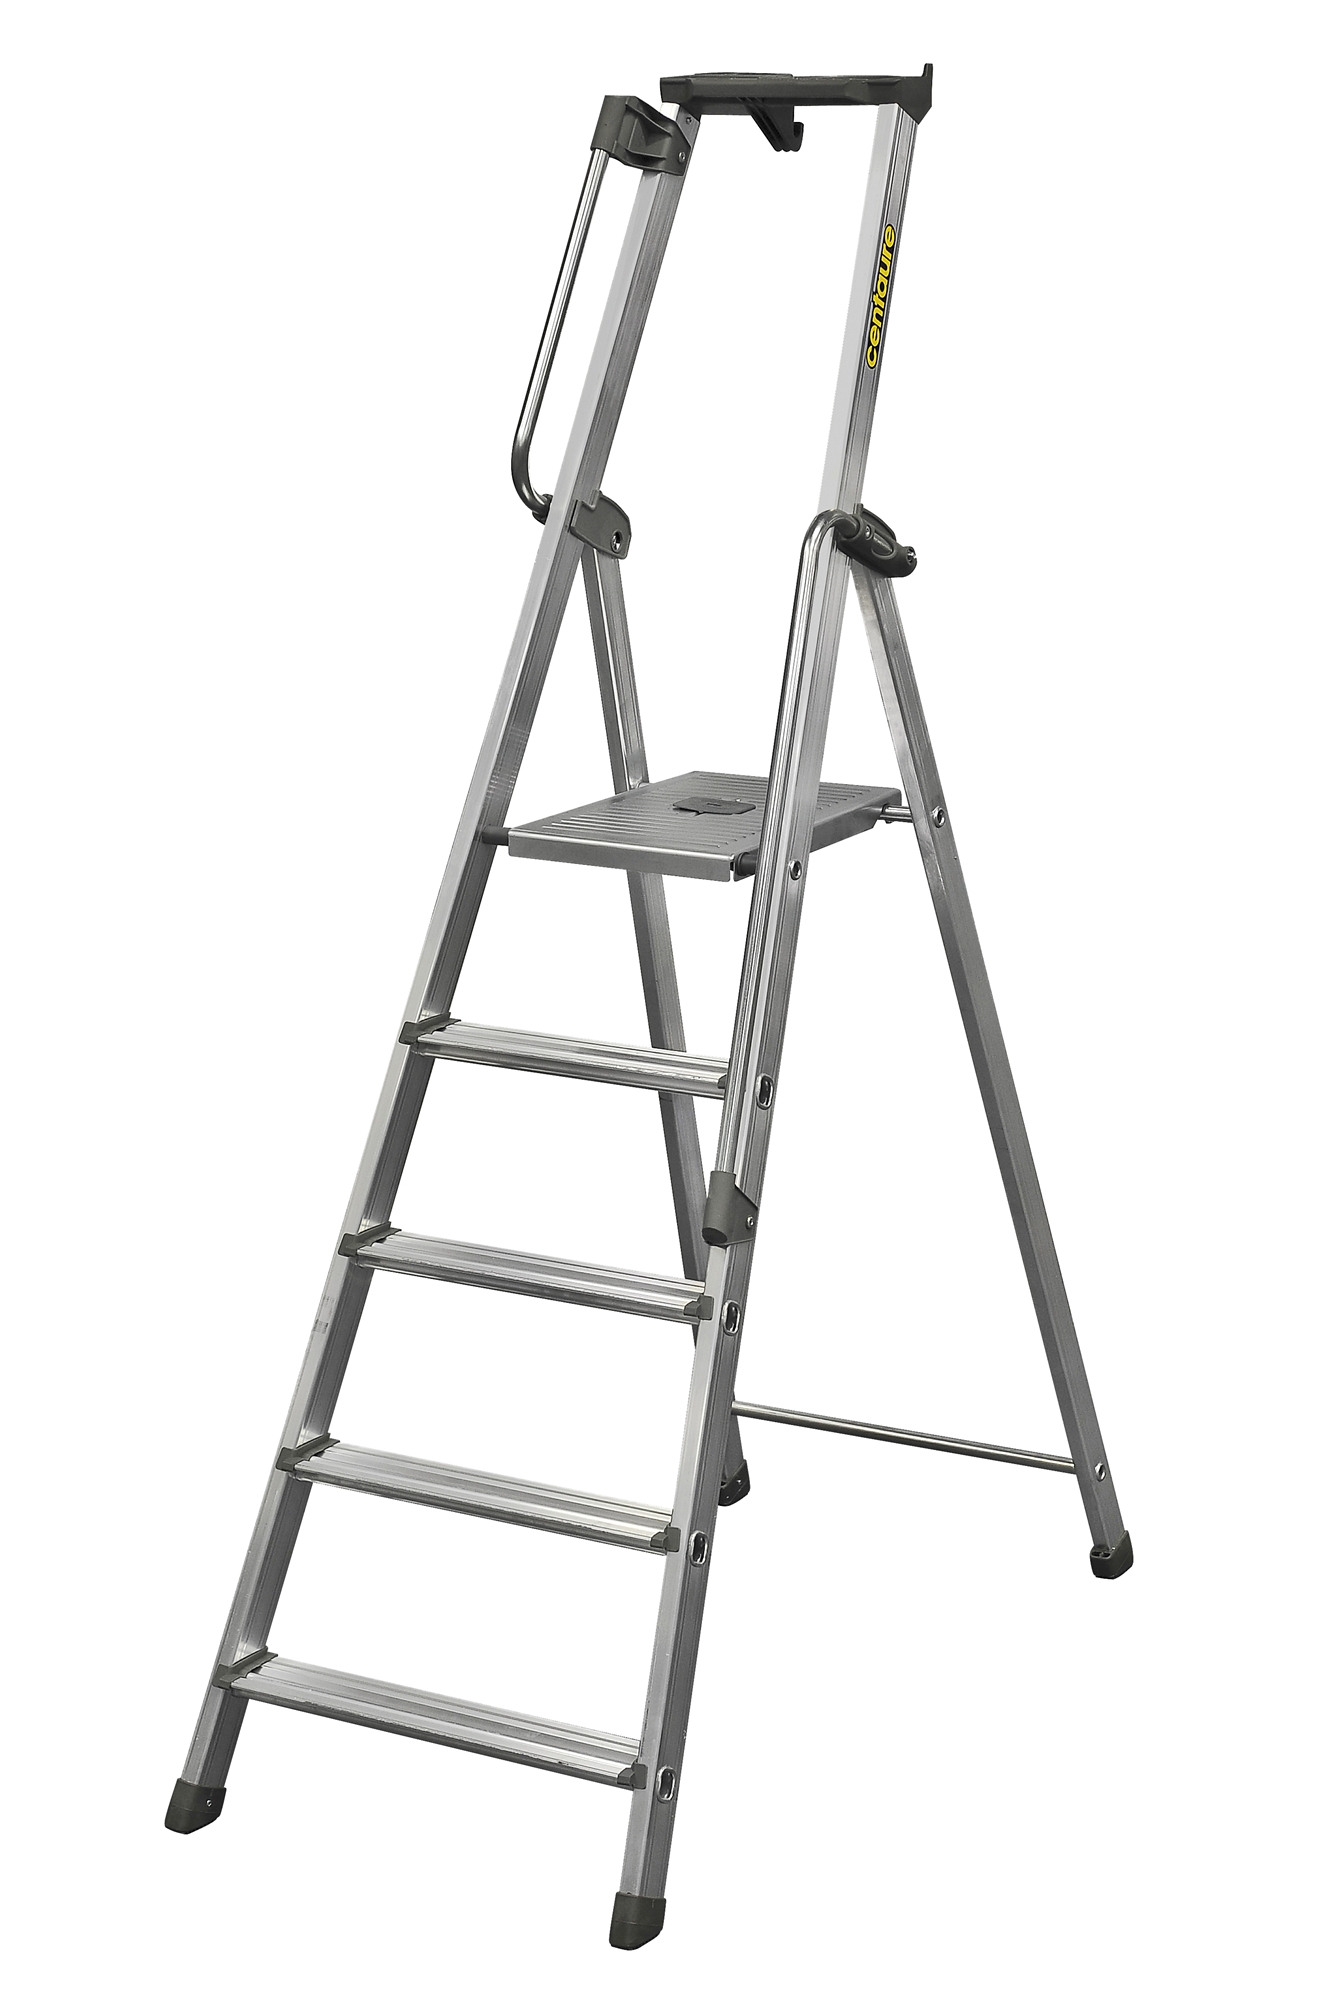 Aluminum ladder with handrail XL type 5 steps